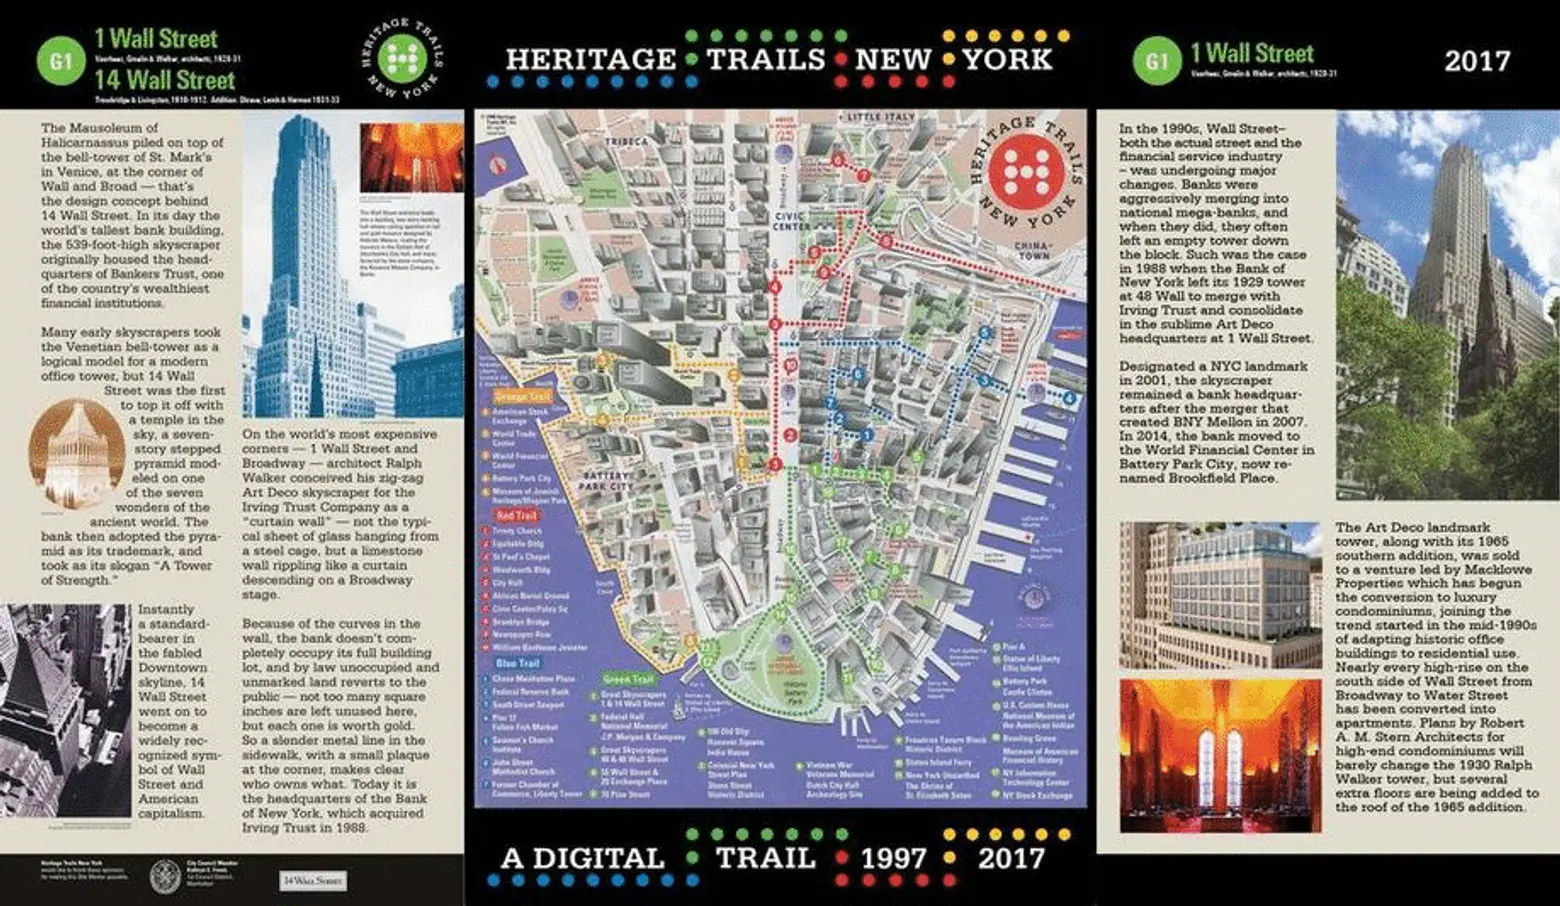 Travel along the historic trails of Lower Manhattan with this interactive map